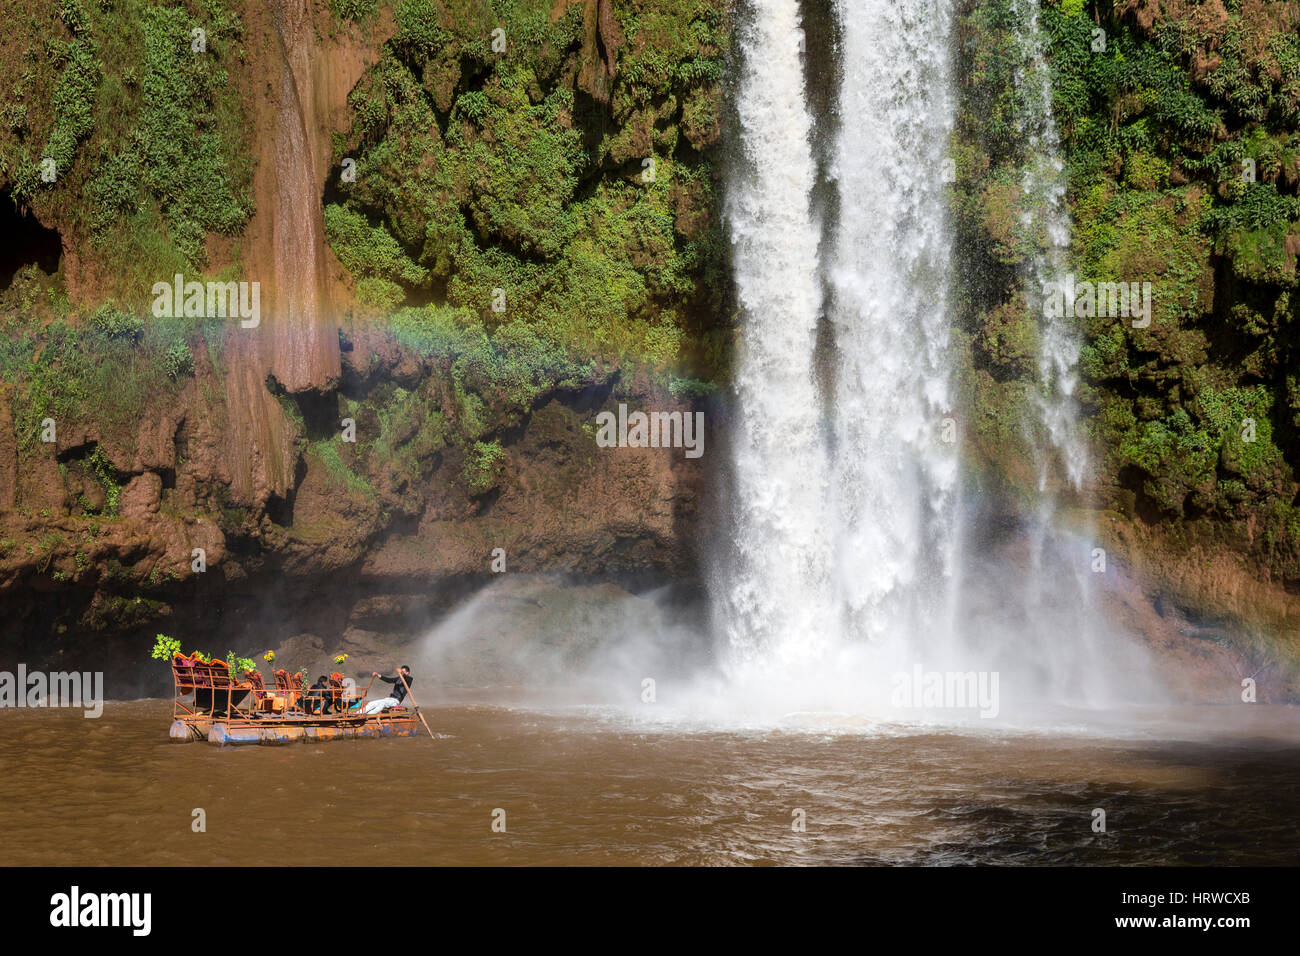 Falls of Ouzoud, Cascades d'Ouzoud, Morocco.  Raft for Tourists at the Bottom of the Falls. Stock Photo